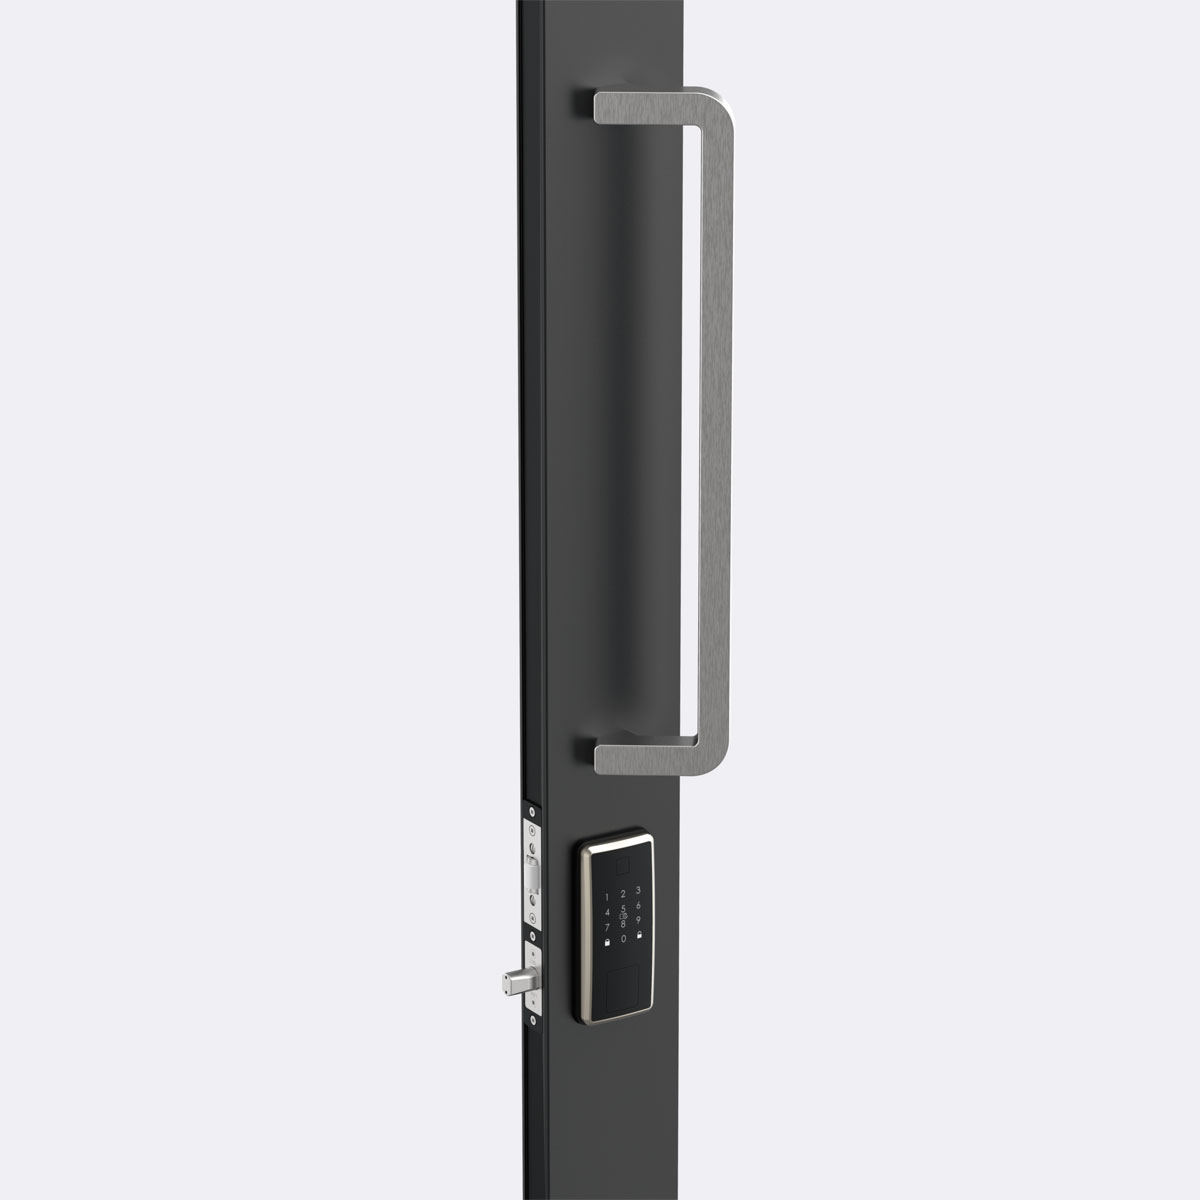 Architectural offset door handle with key pad